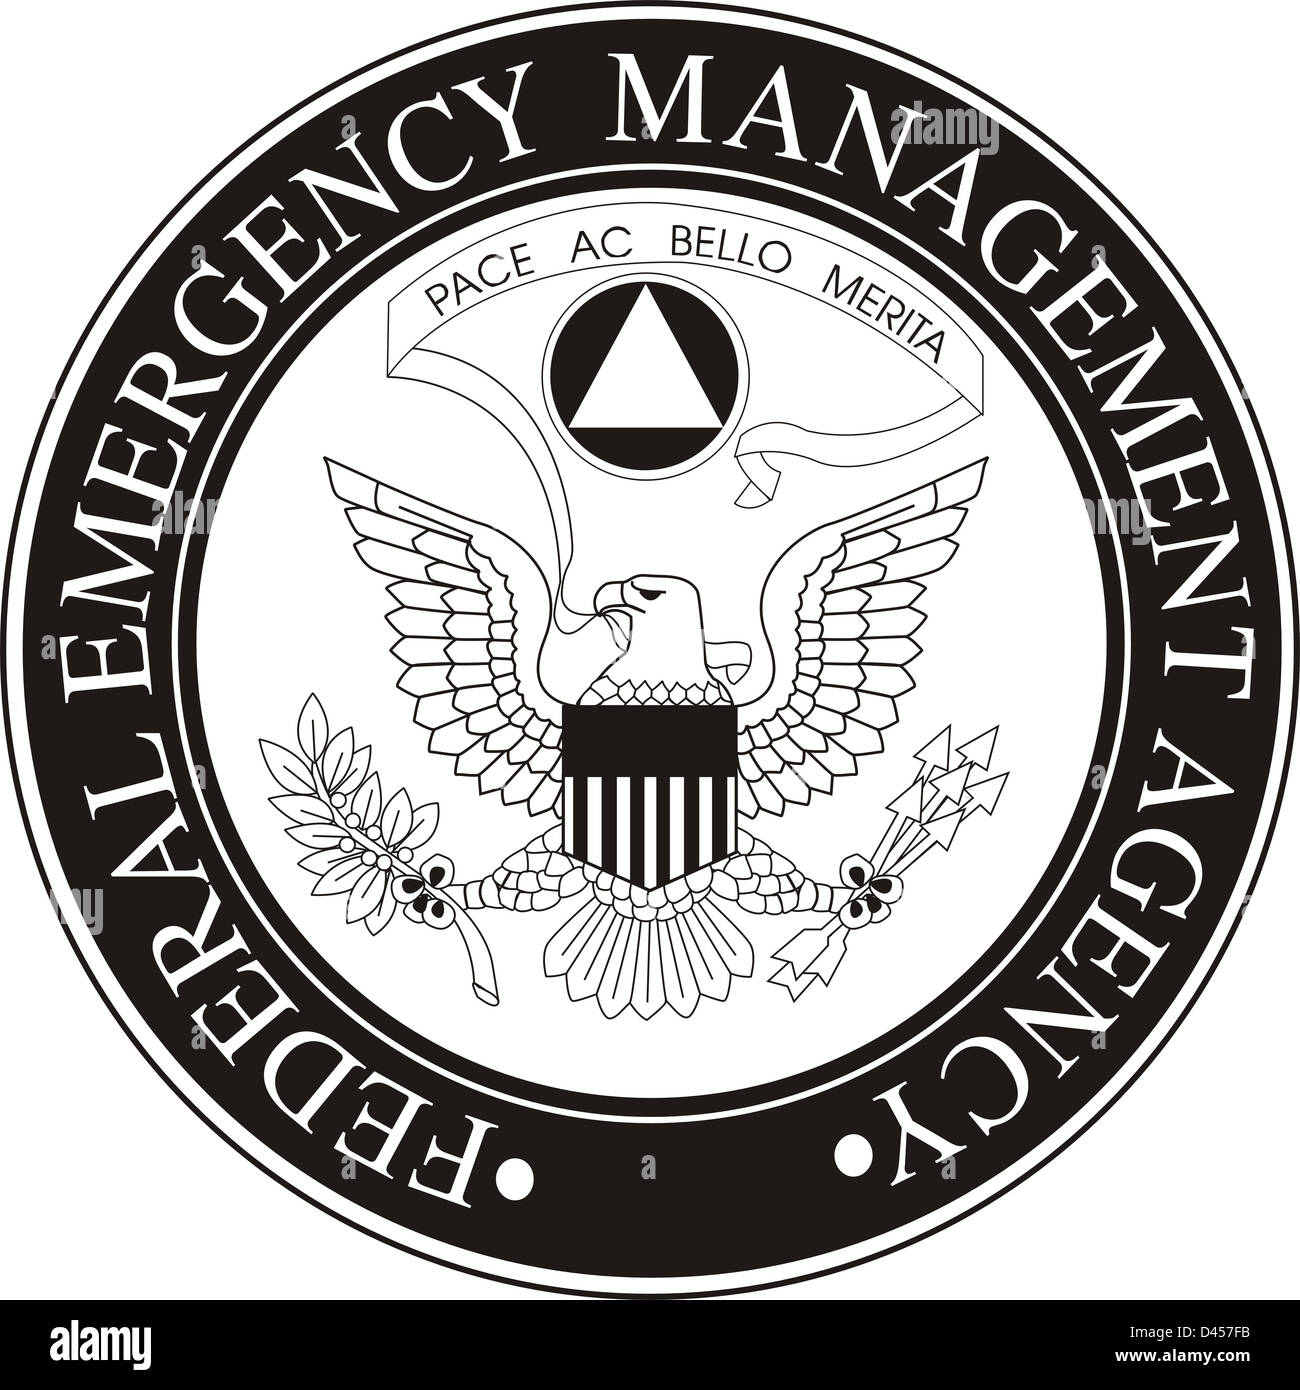 United States Federal Emergency Management Agency seal Stock Photo